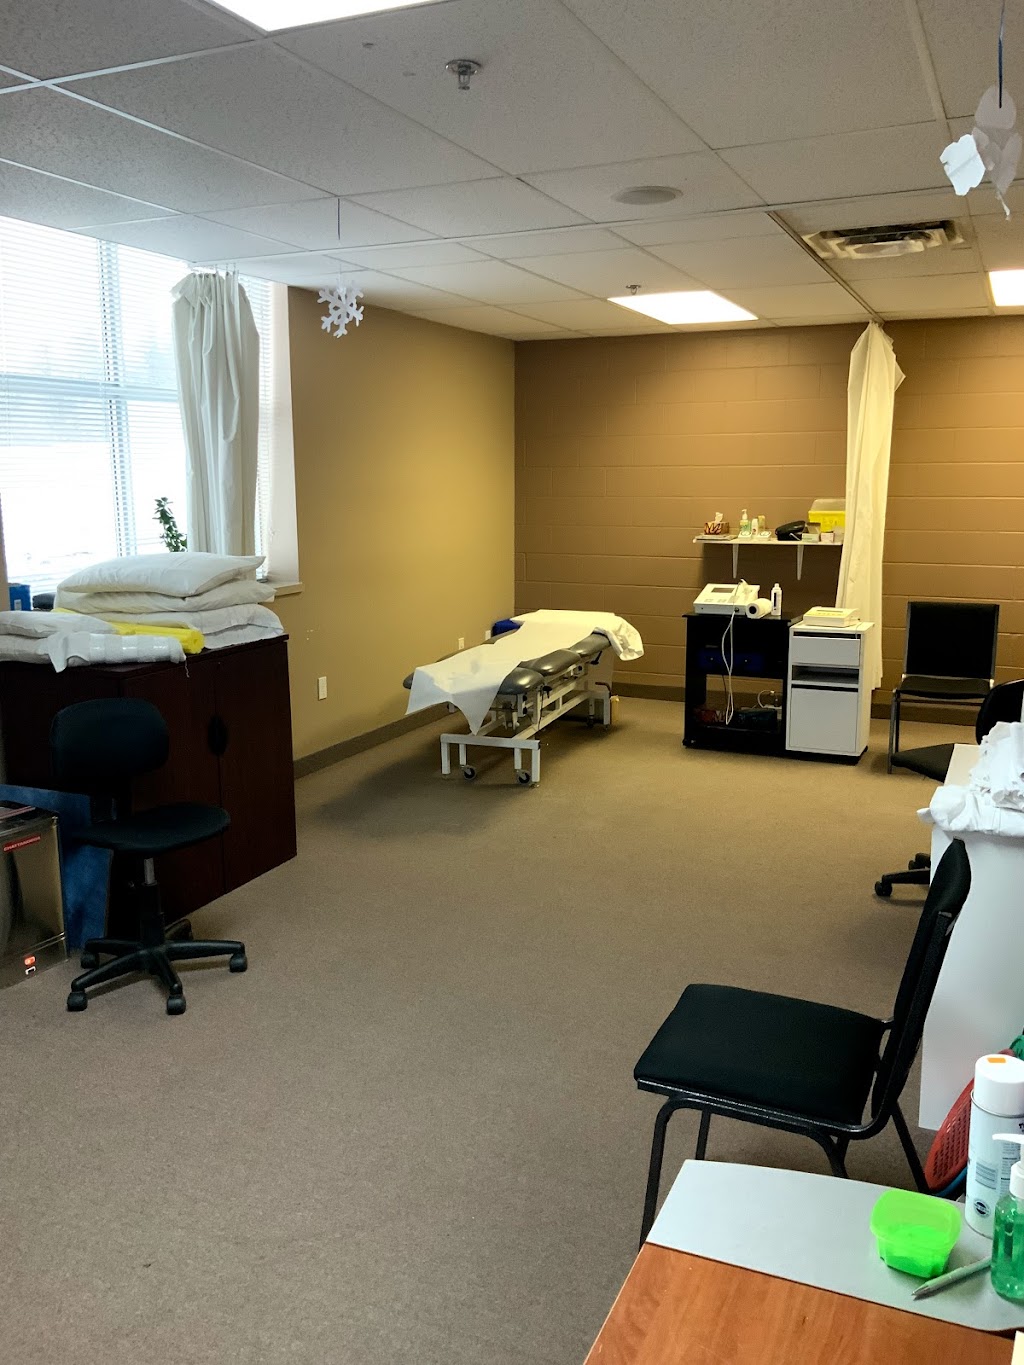 Progressive Physiotherapy | 9 Industrial Dr, Grimsby, ON L3M 5H8, Canada | Phone: (905) 945-7771